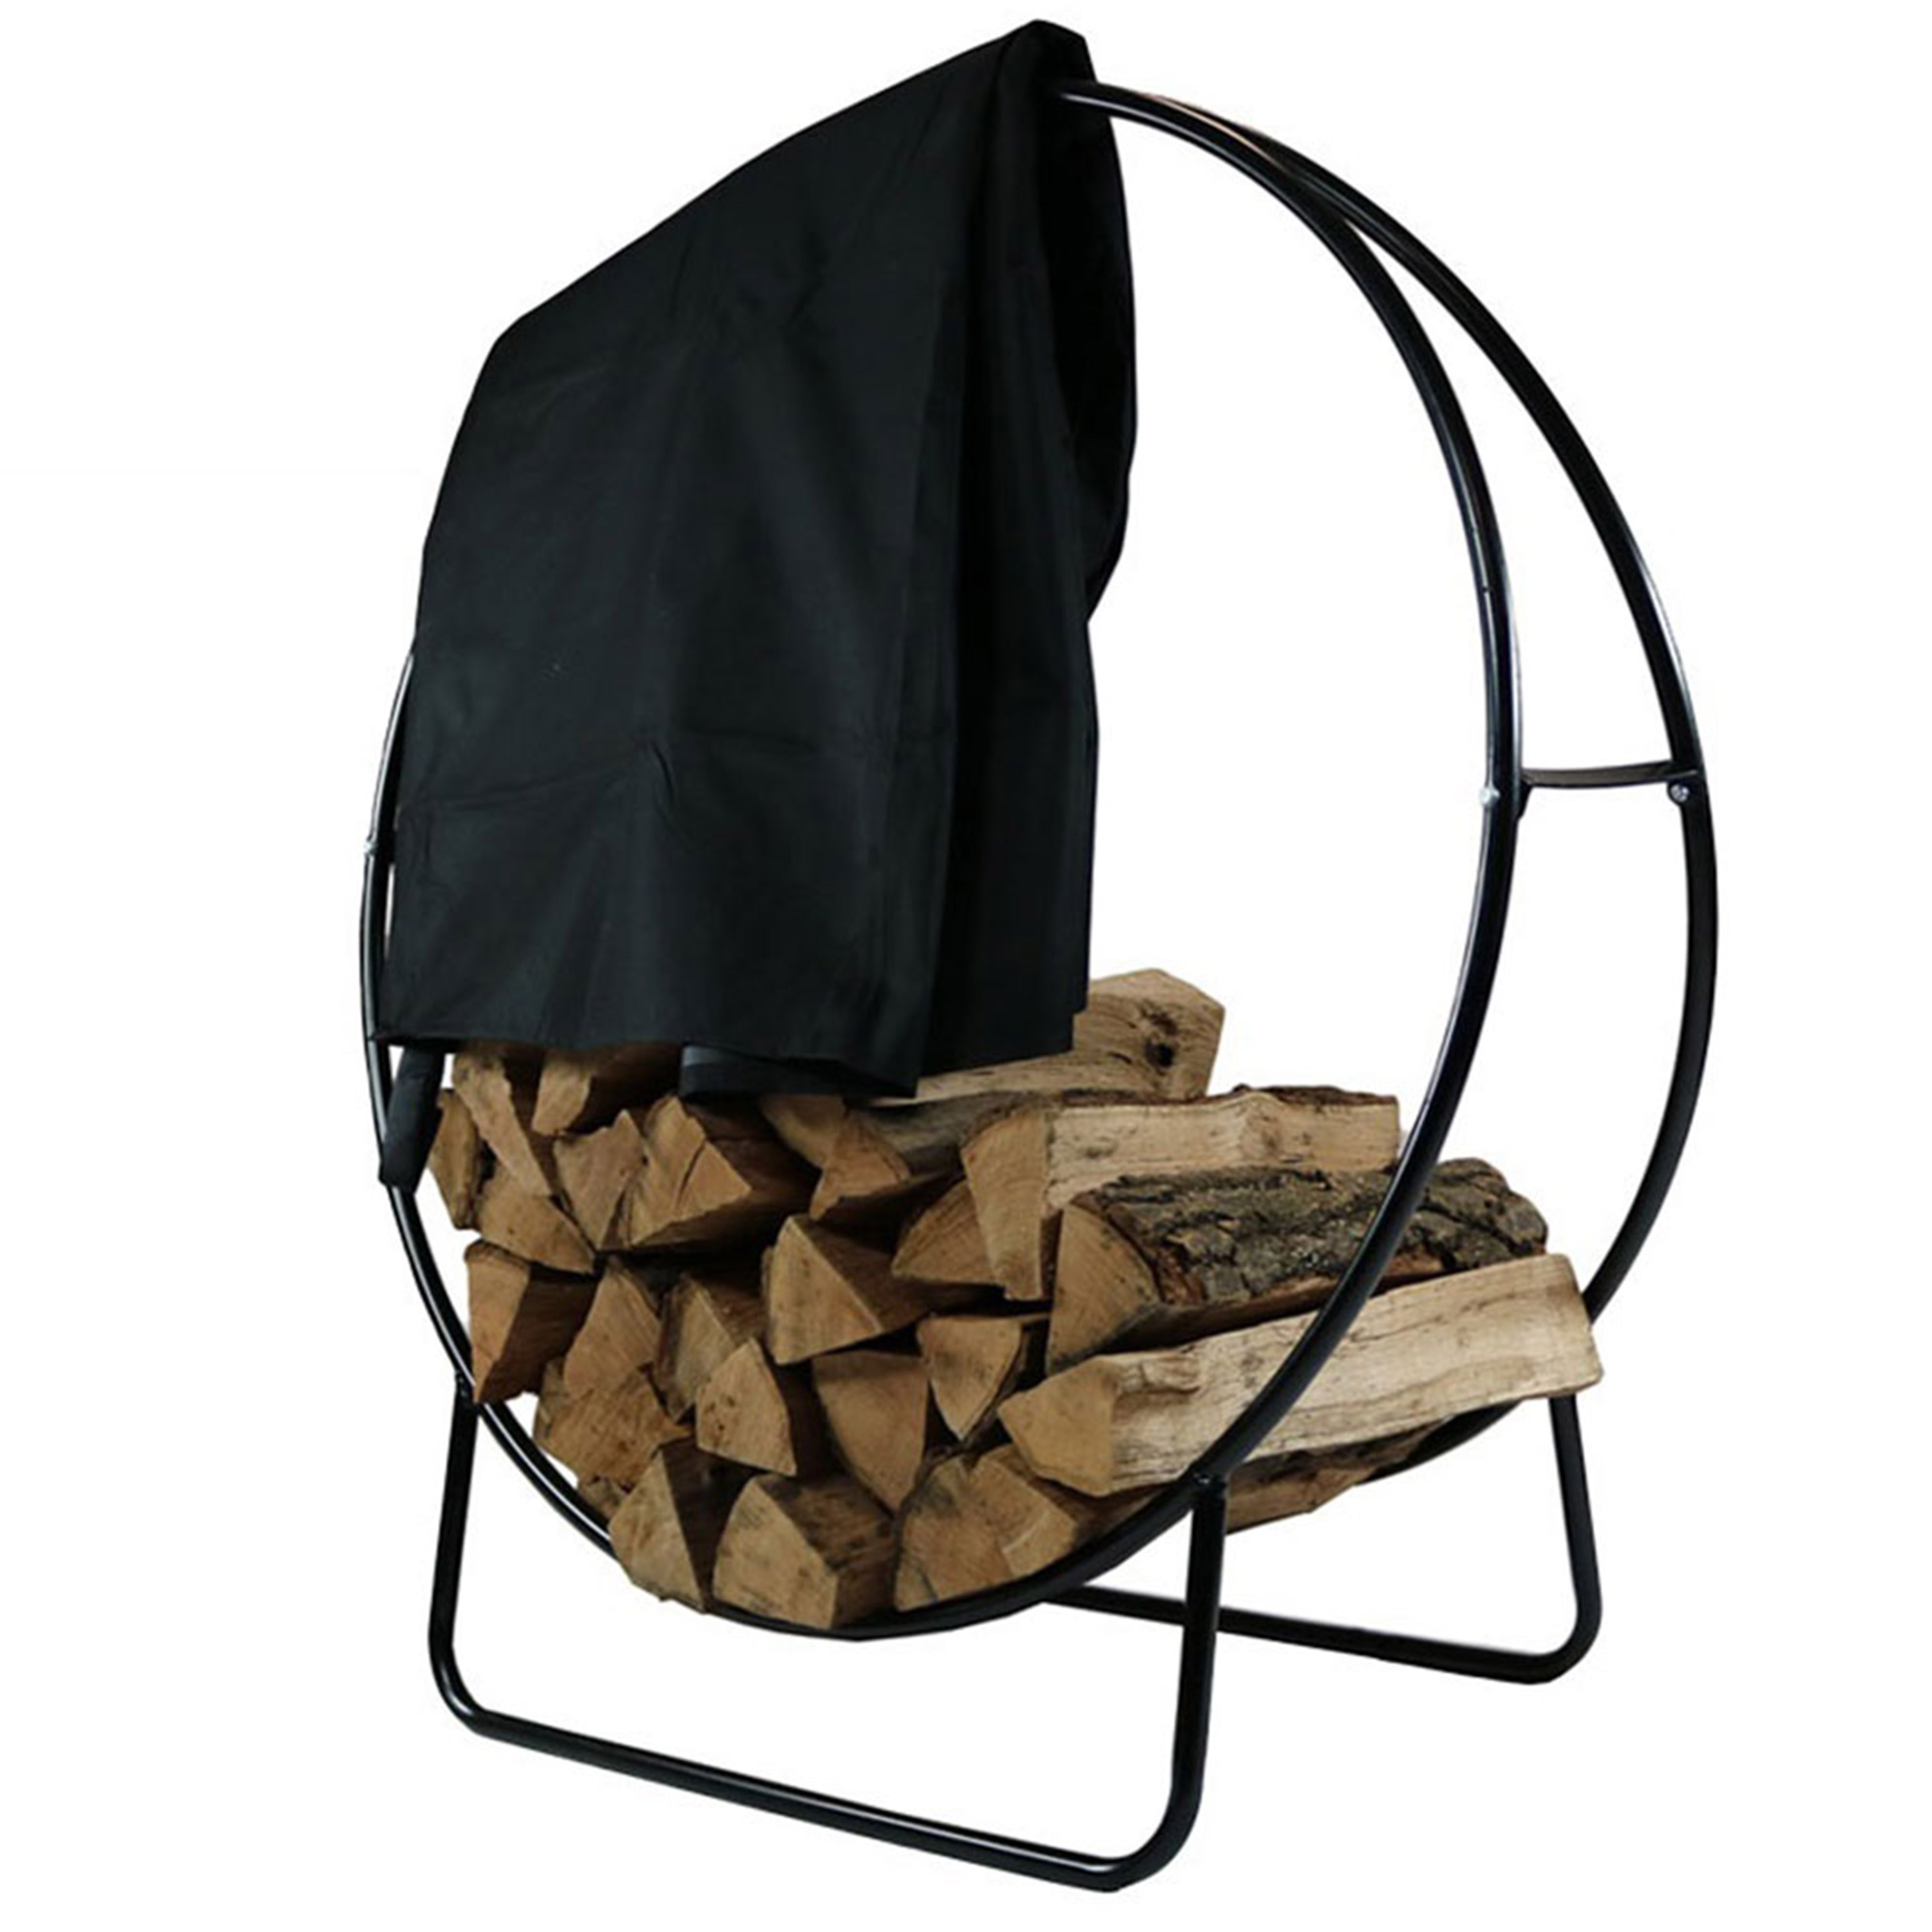 Sunnydaze Steel Firewood Log Hoop, Size and Color Options Available, Black, 40-Inch, Hoop and Cover Combo